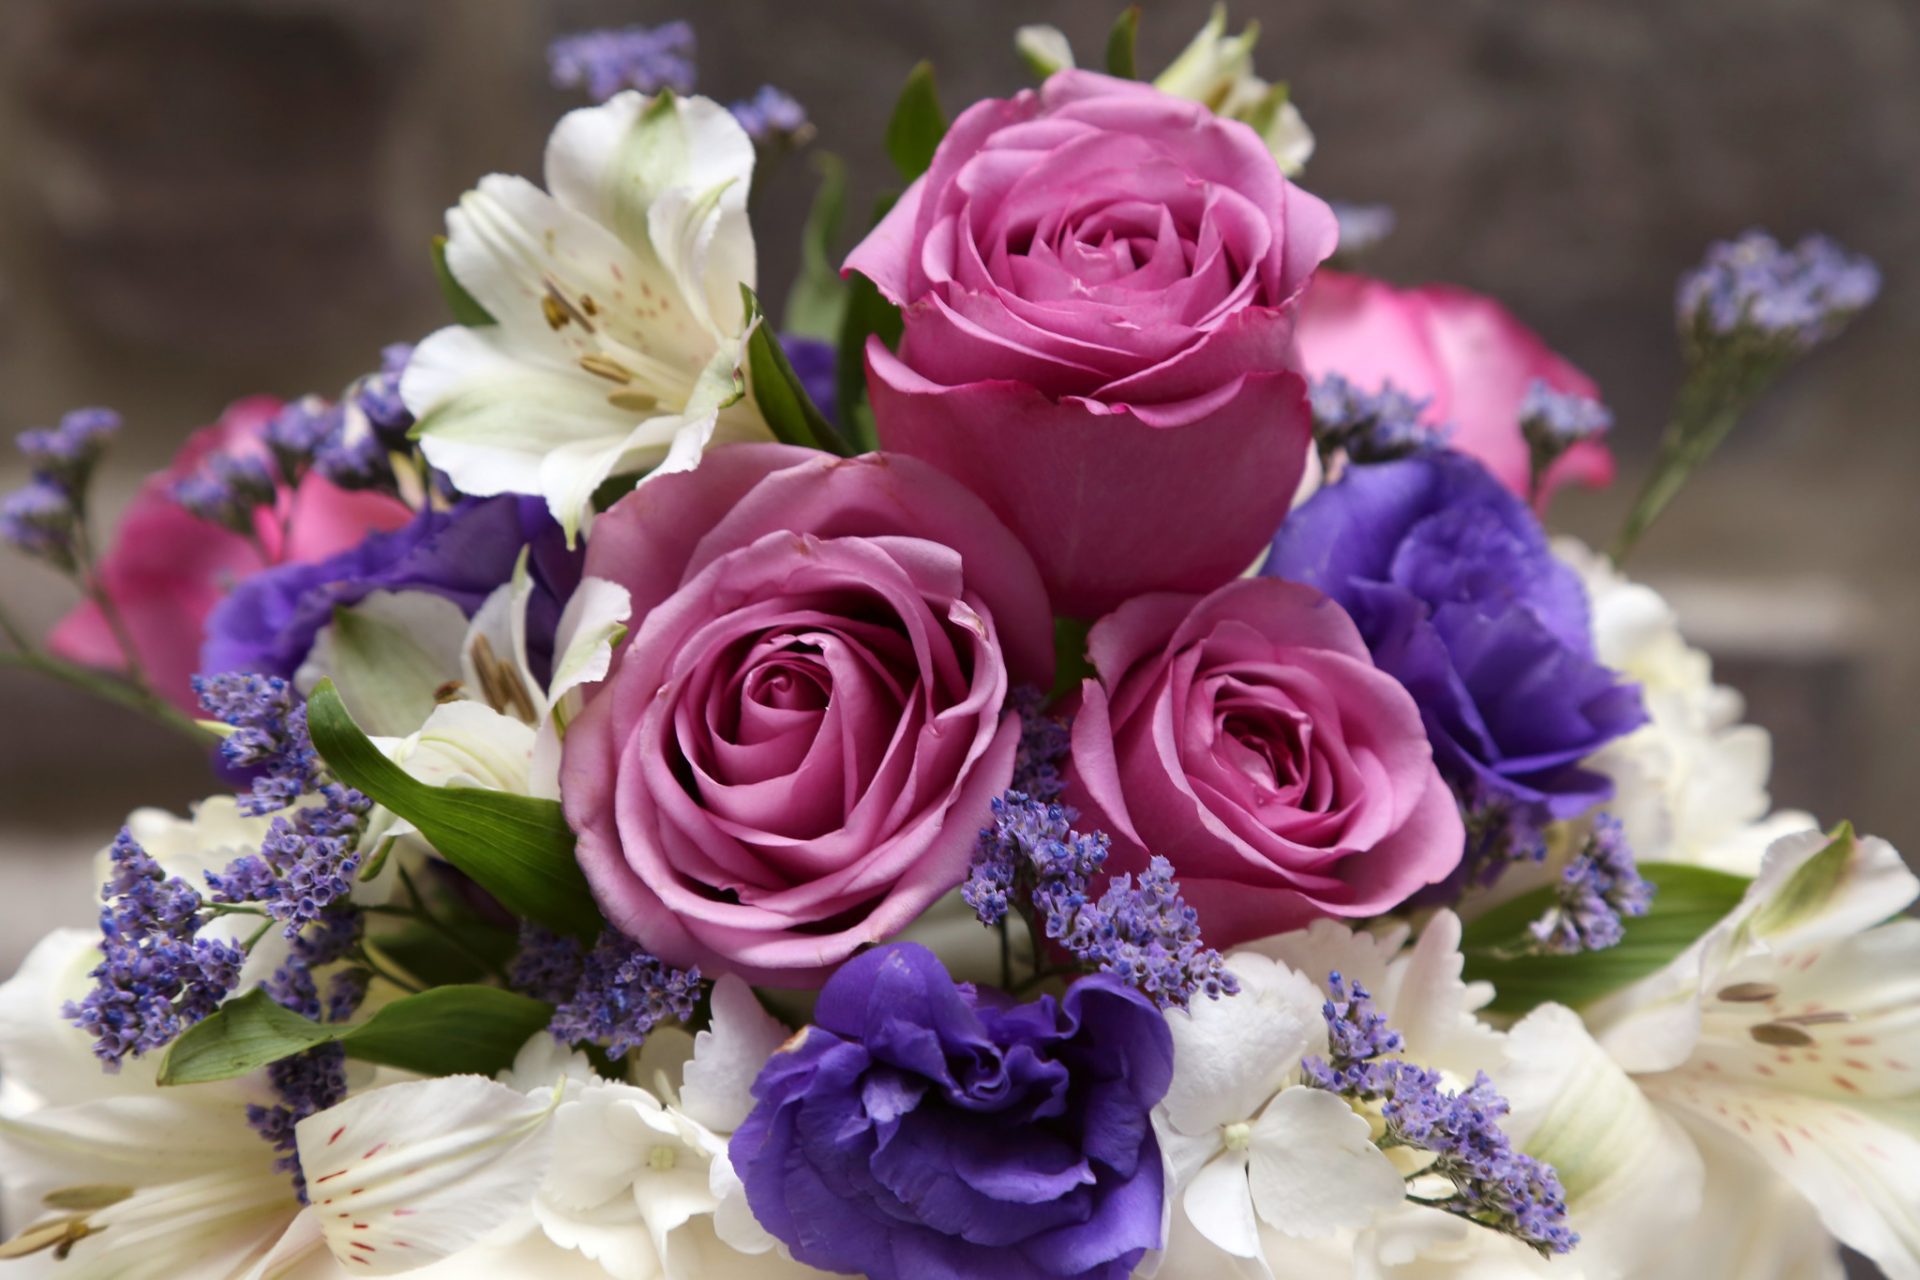 Close up of pink and purple roses used in summer wedding floral arrangement.